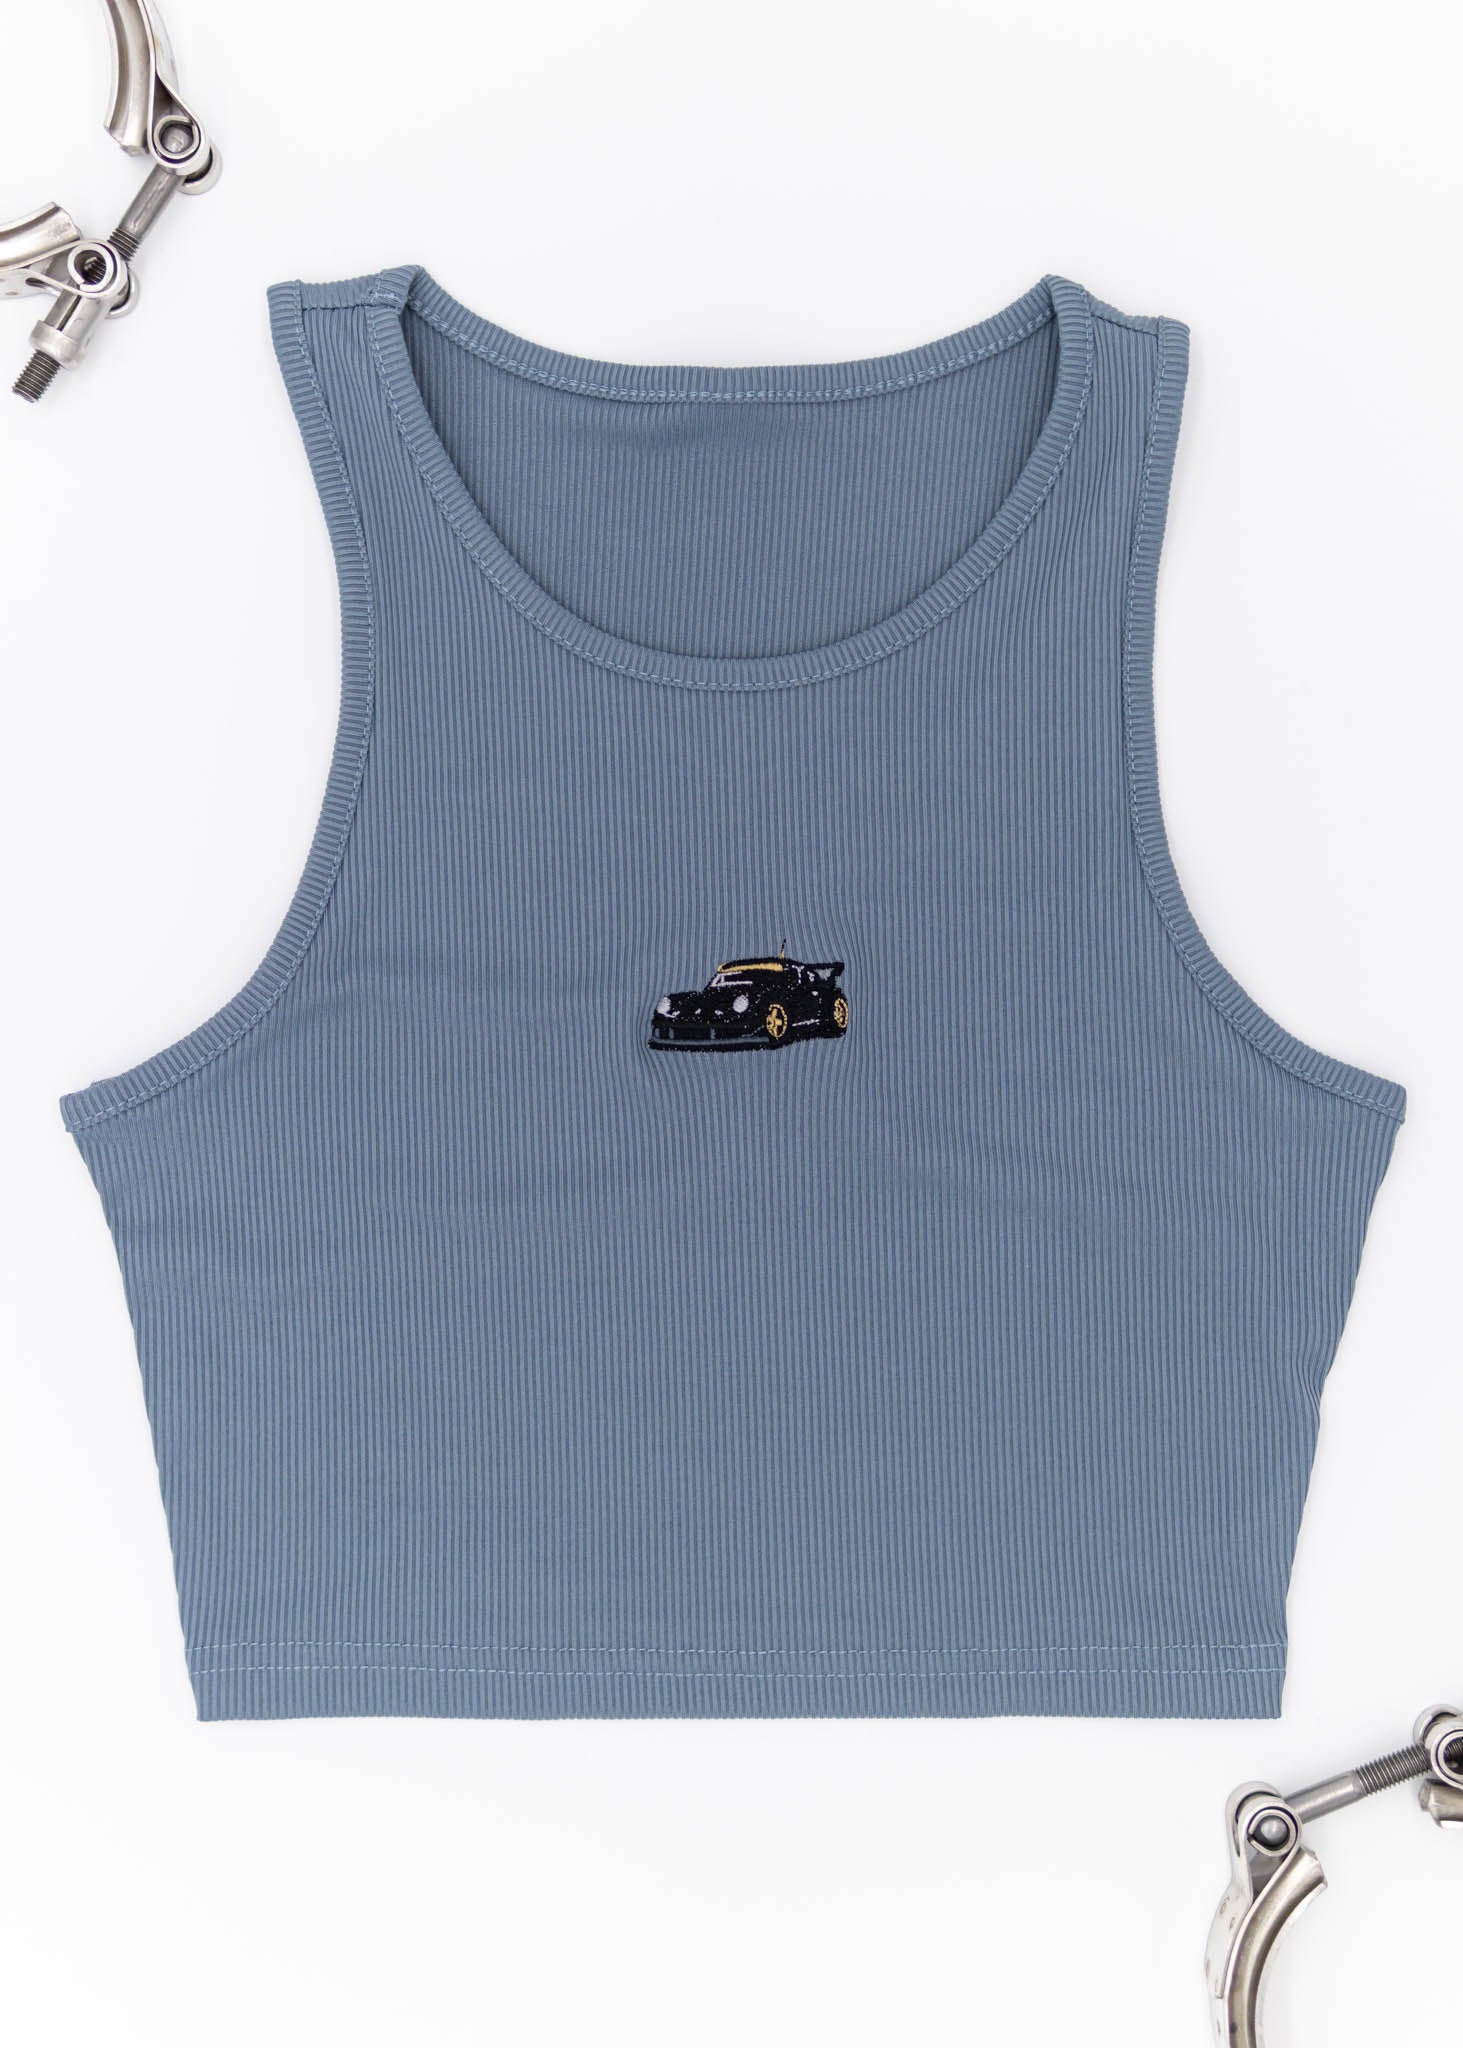 A blue RWB Porsche 930 911 Turbo crop top for women. Photo is a front view of the shirt with Akira Nakai's RWB Porsche 930 911 Turbo Stella Artois. Fabric composition is a polyester, and elastine mix. The material is very stretchy, comfortable, and non-transparent. The style of this shirt is sleeveless, tank top straps, with crewneck neckline.